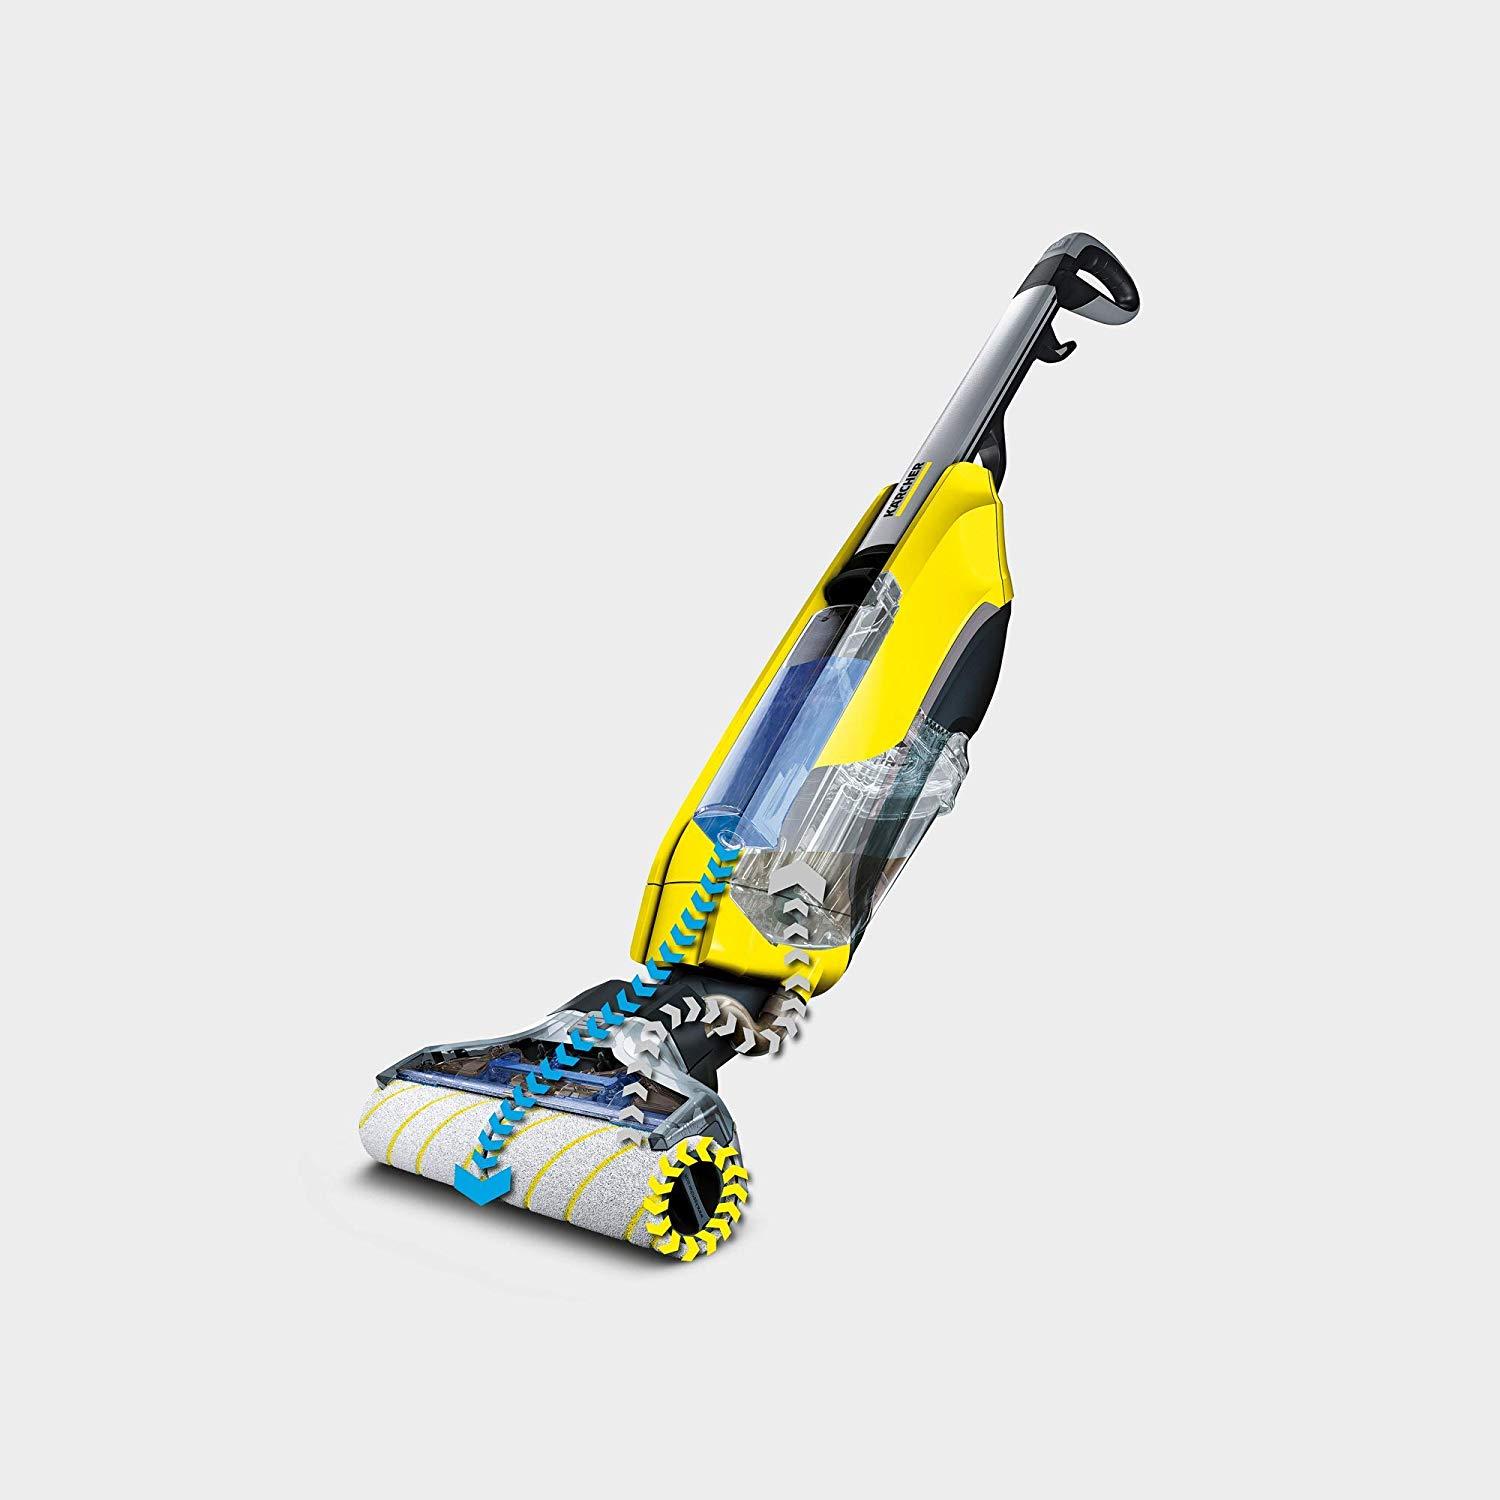 Karcher FC 5 Hard Floor Mop and Vacuum Cleaner - Yellow